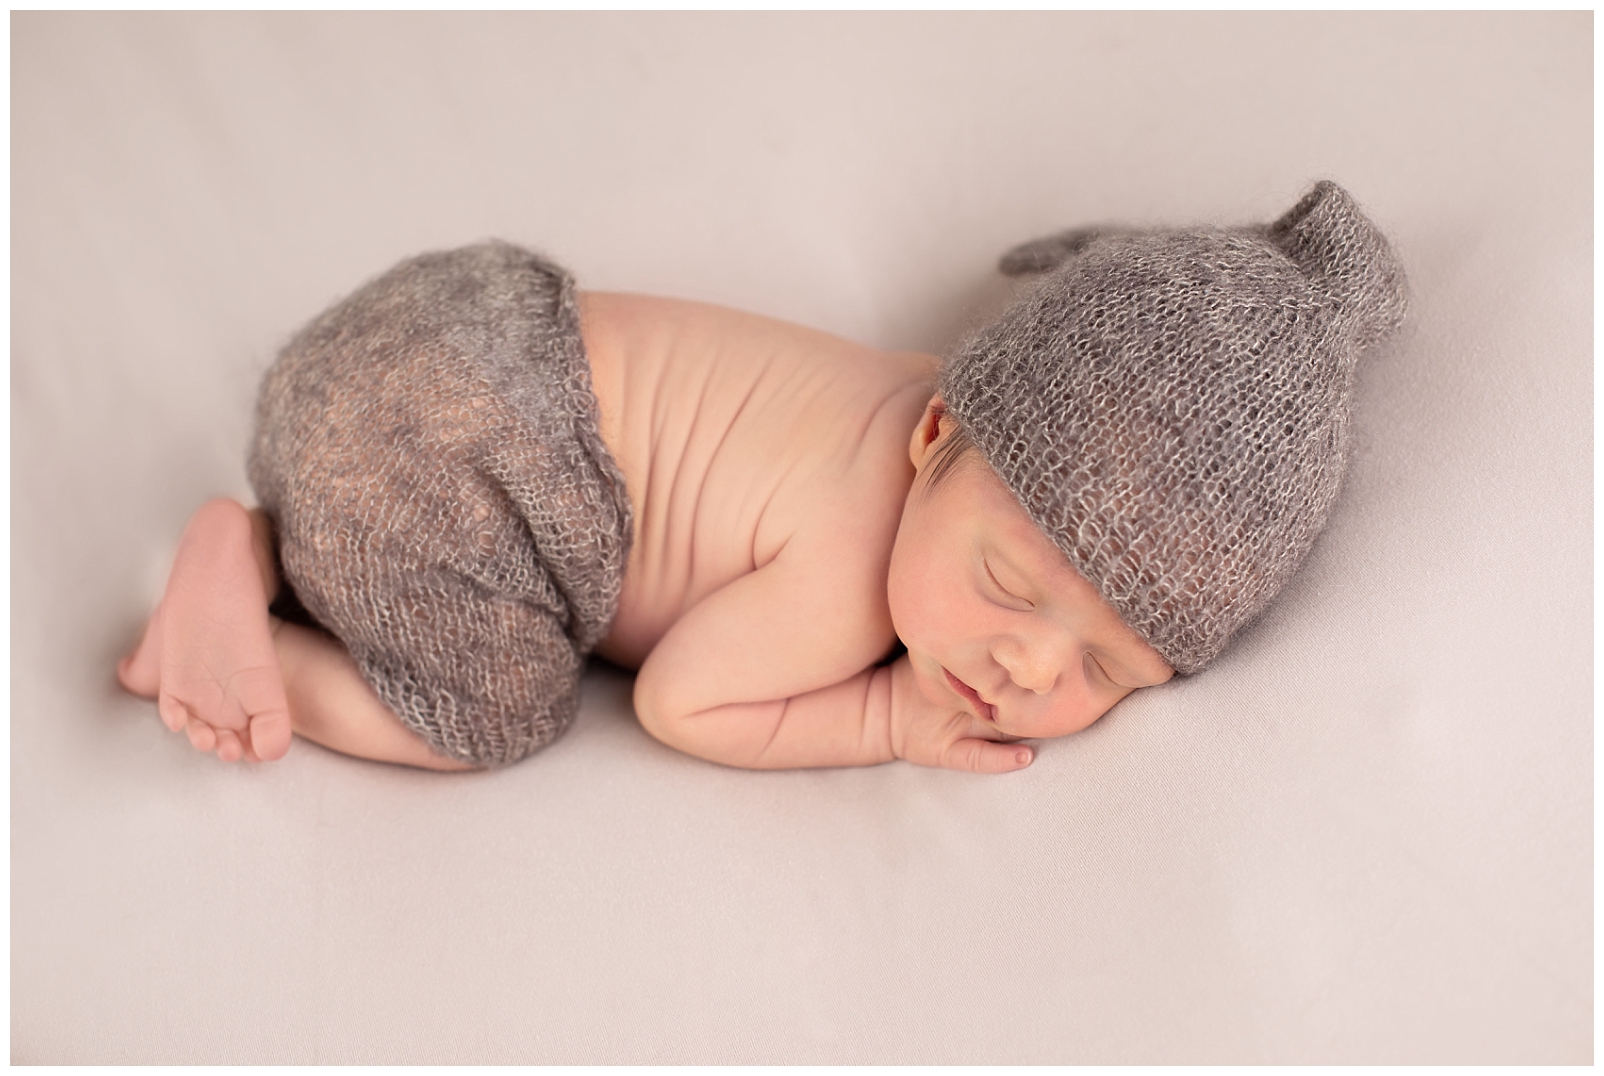 newborn in tushy up pose wearing hat and shorts